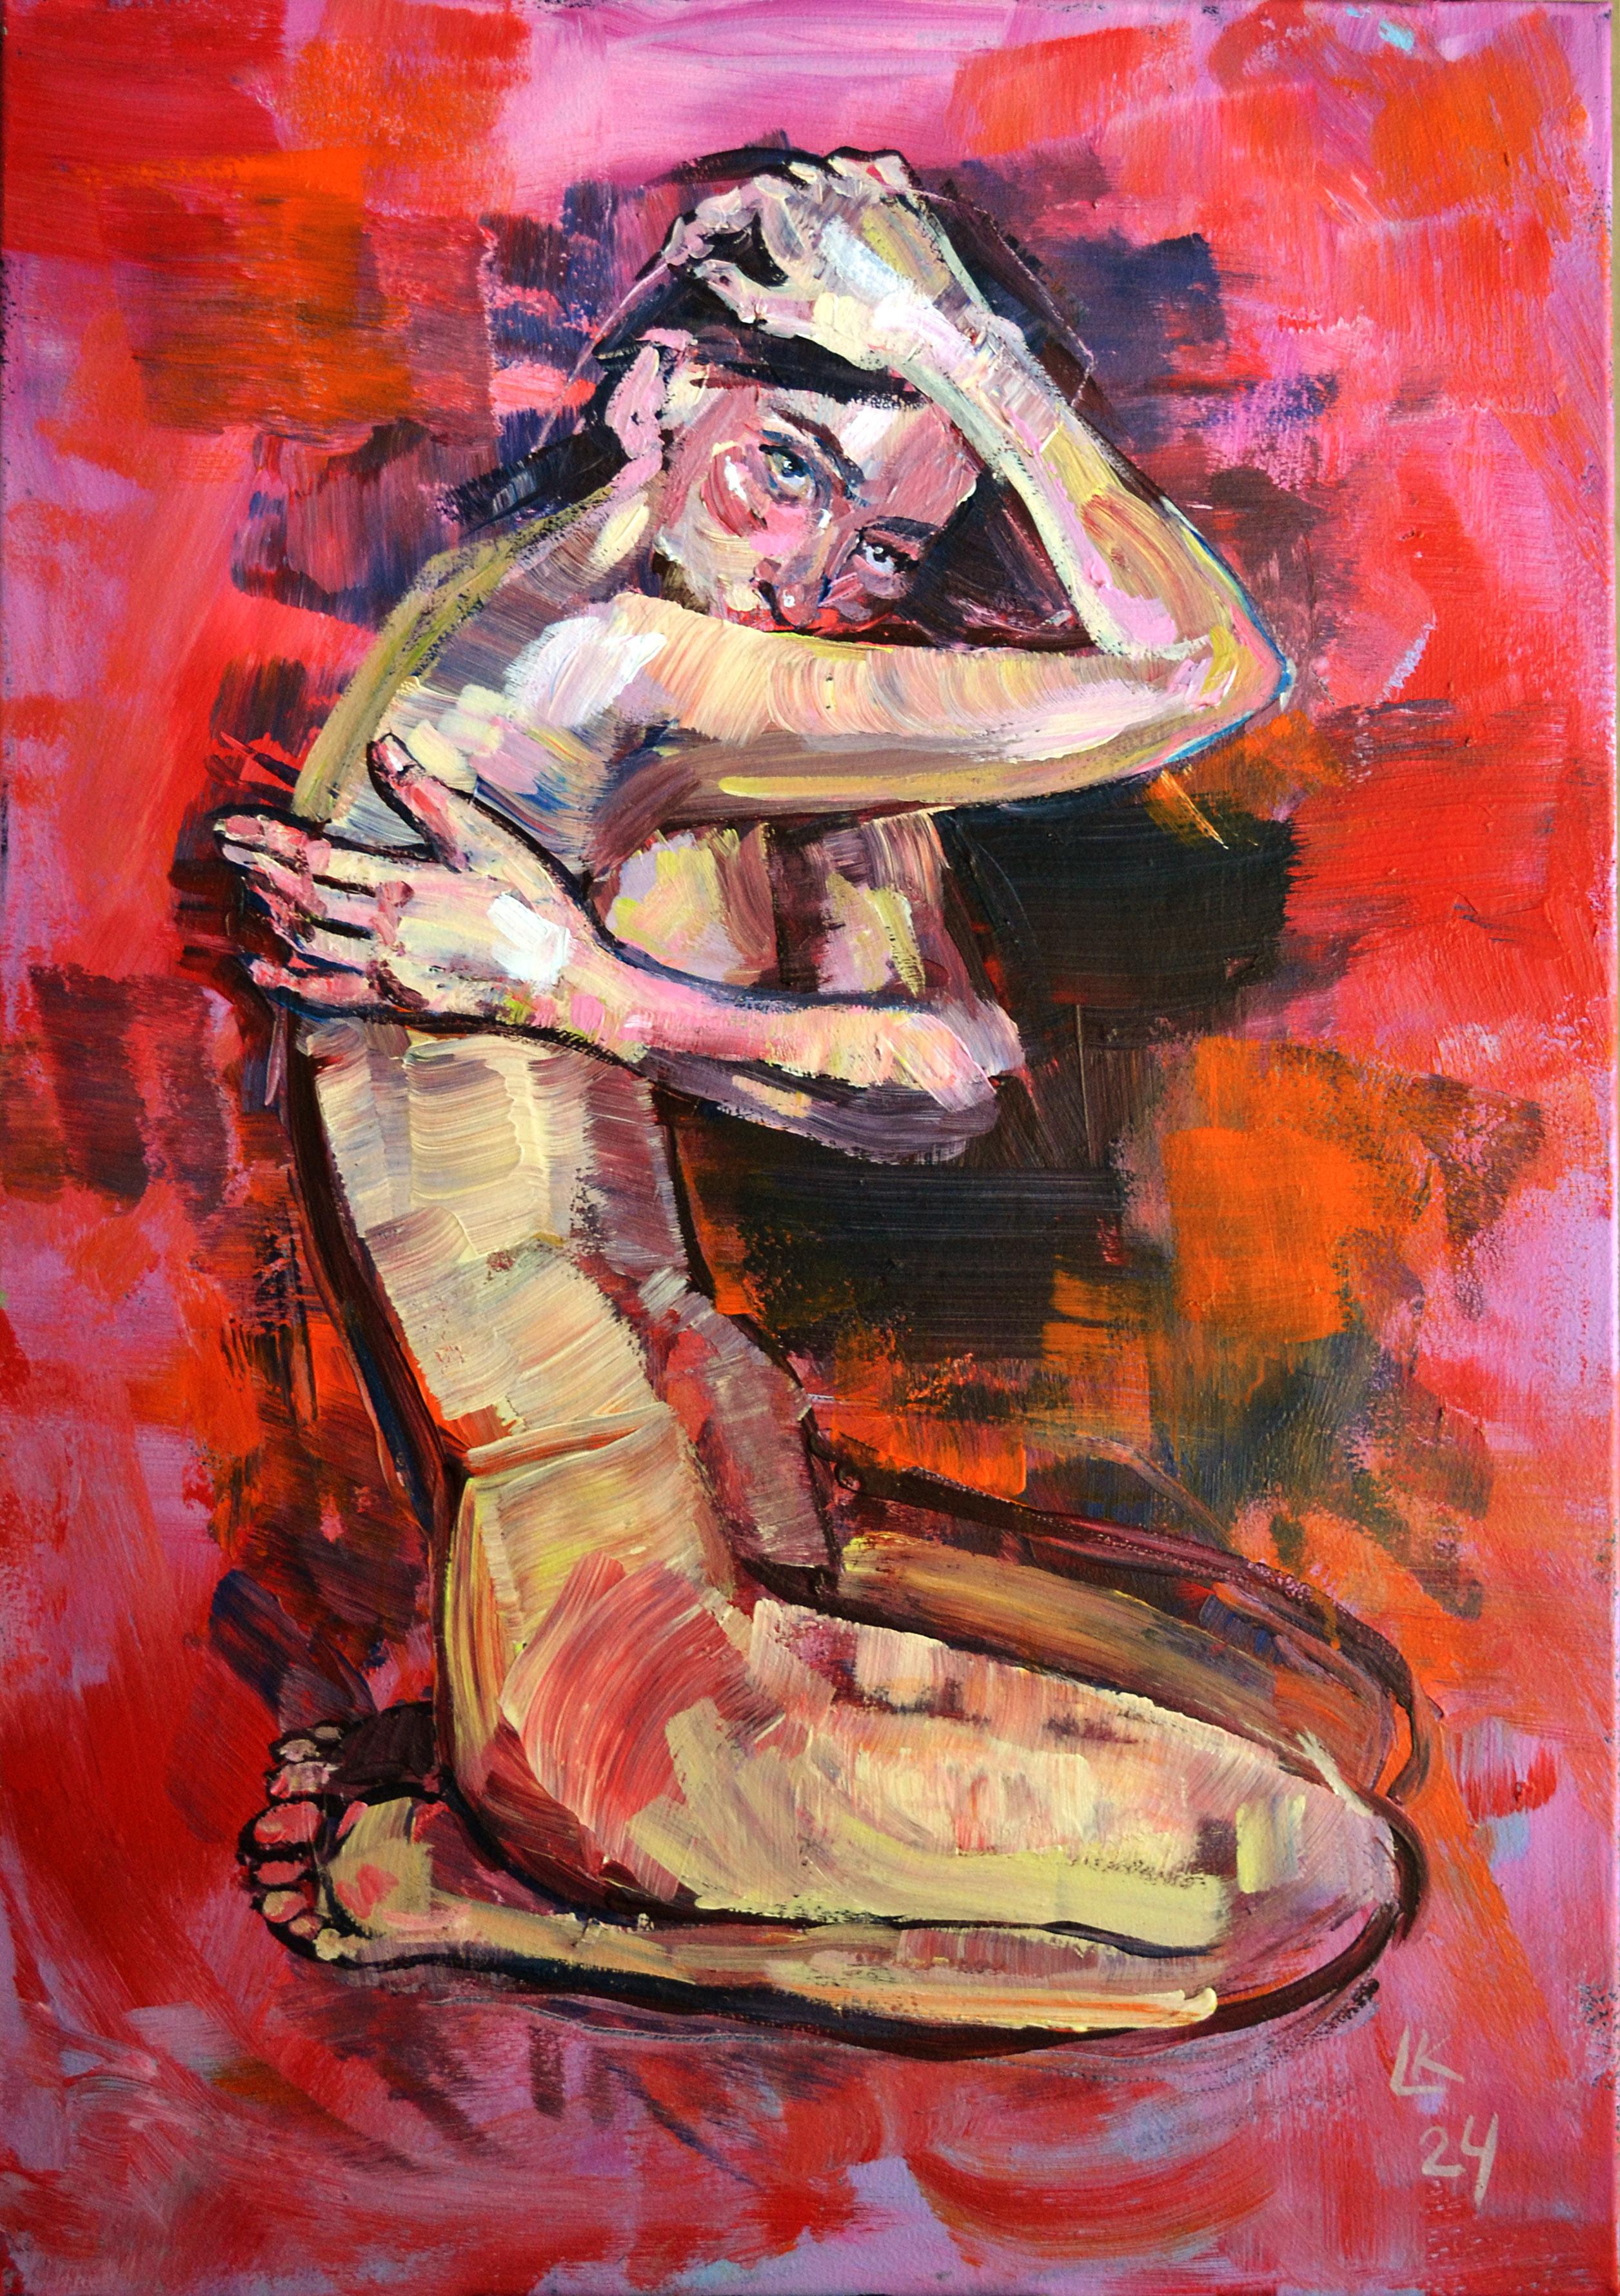 In this artwork, the serenity of the figure is juxtaposed with the dynamic scarlet background, symbolizing comfort in passion and color. 
The painting portrays the female form in a modernist approach, showcasing a mix of portraiture, expressionism,